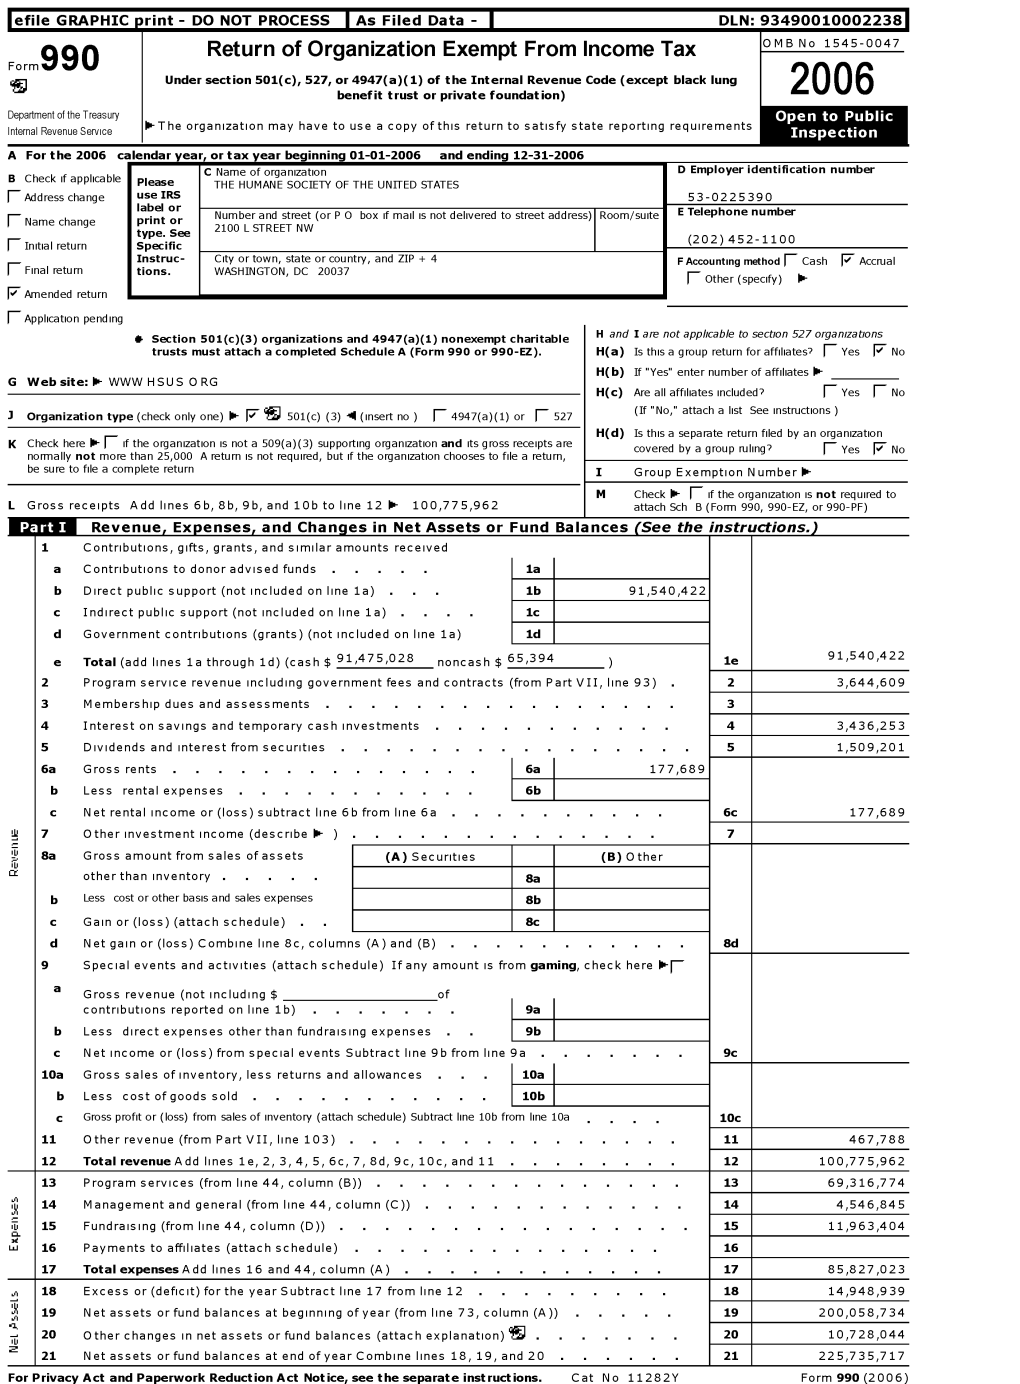 2006 Department of the Treasury Internal Revenue Service -The Organization May Have to Use a Copy of This Return to Satisfy State Reporting Requirements